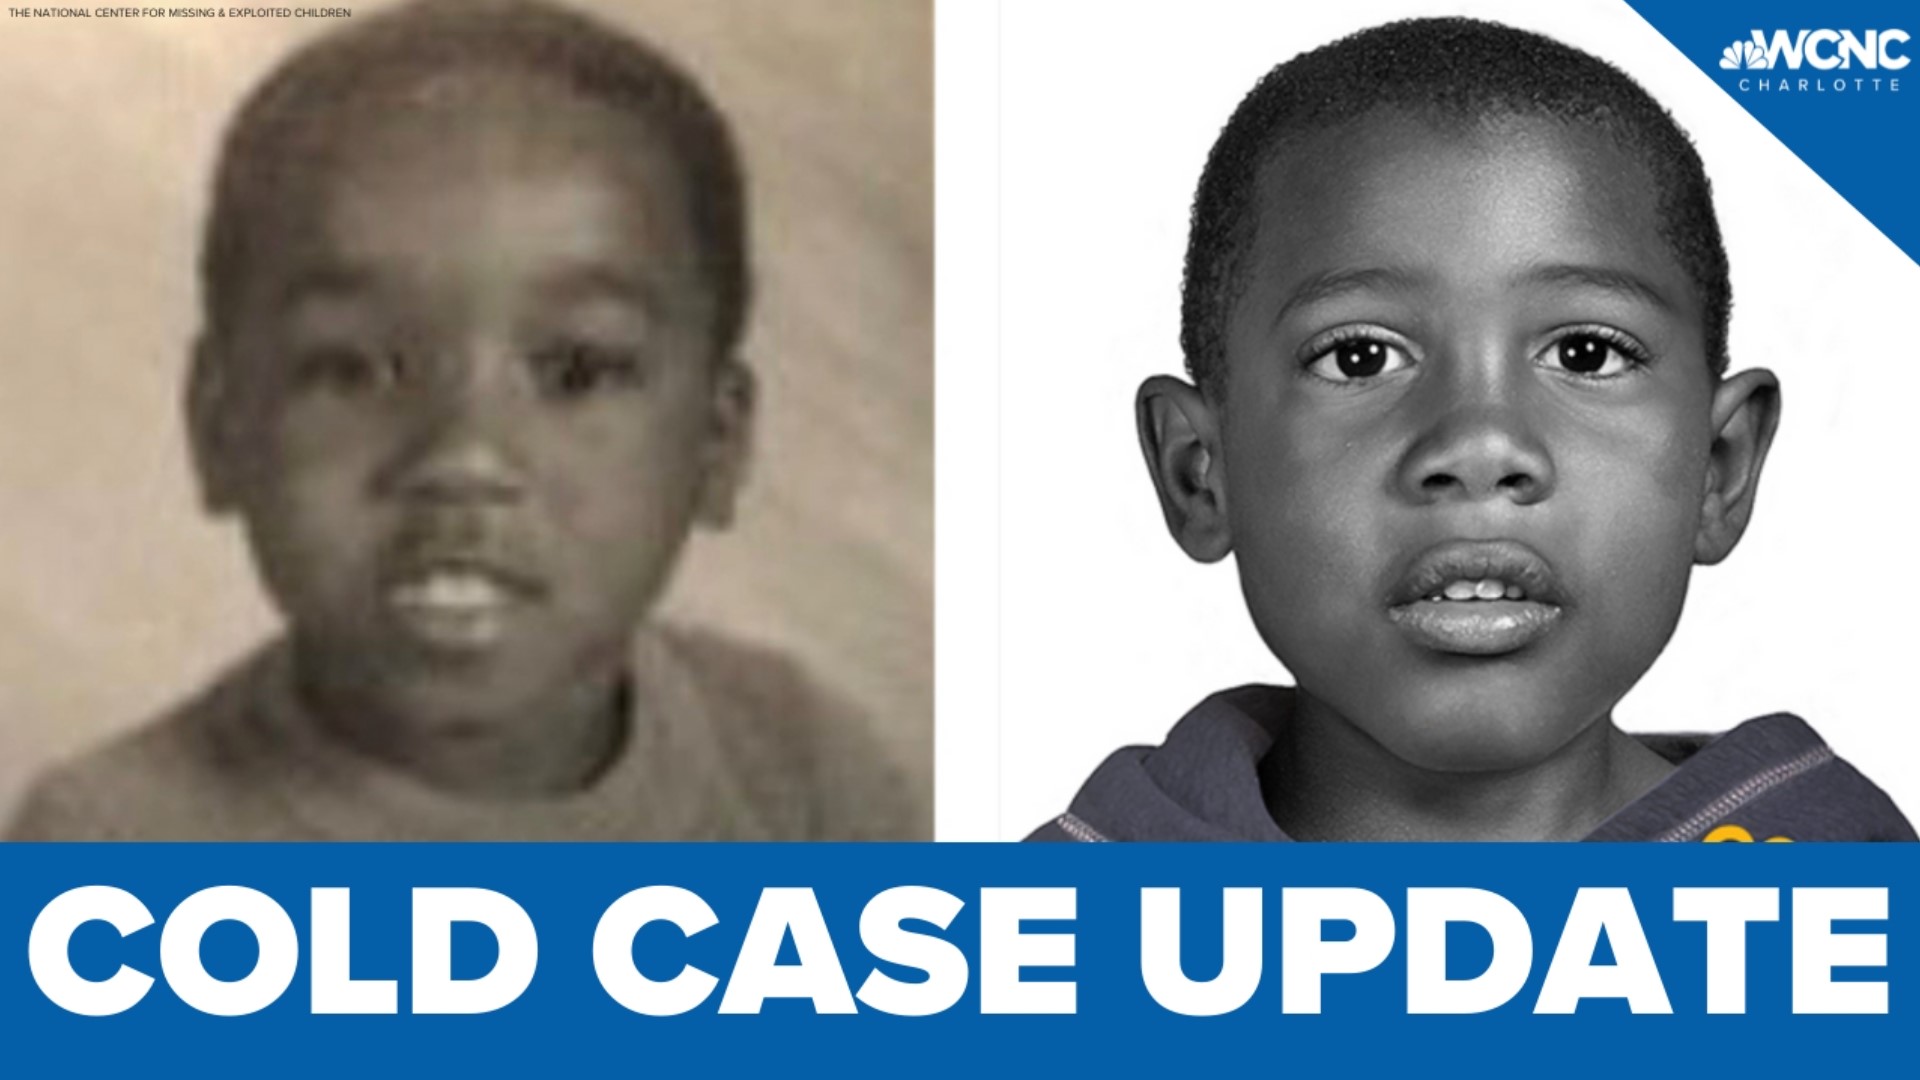 Authorities say they've solved a more than 20 year old cold case involving a missing child.